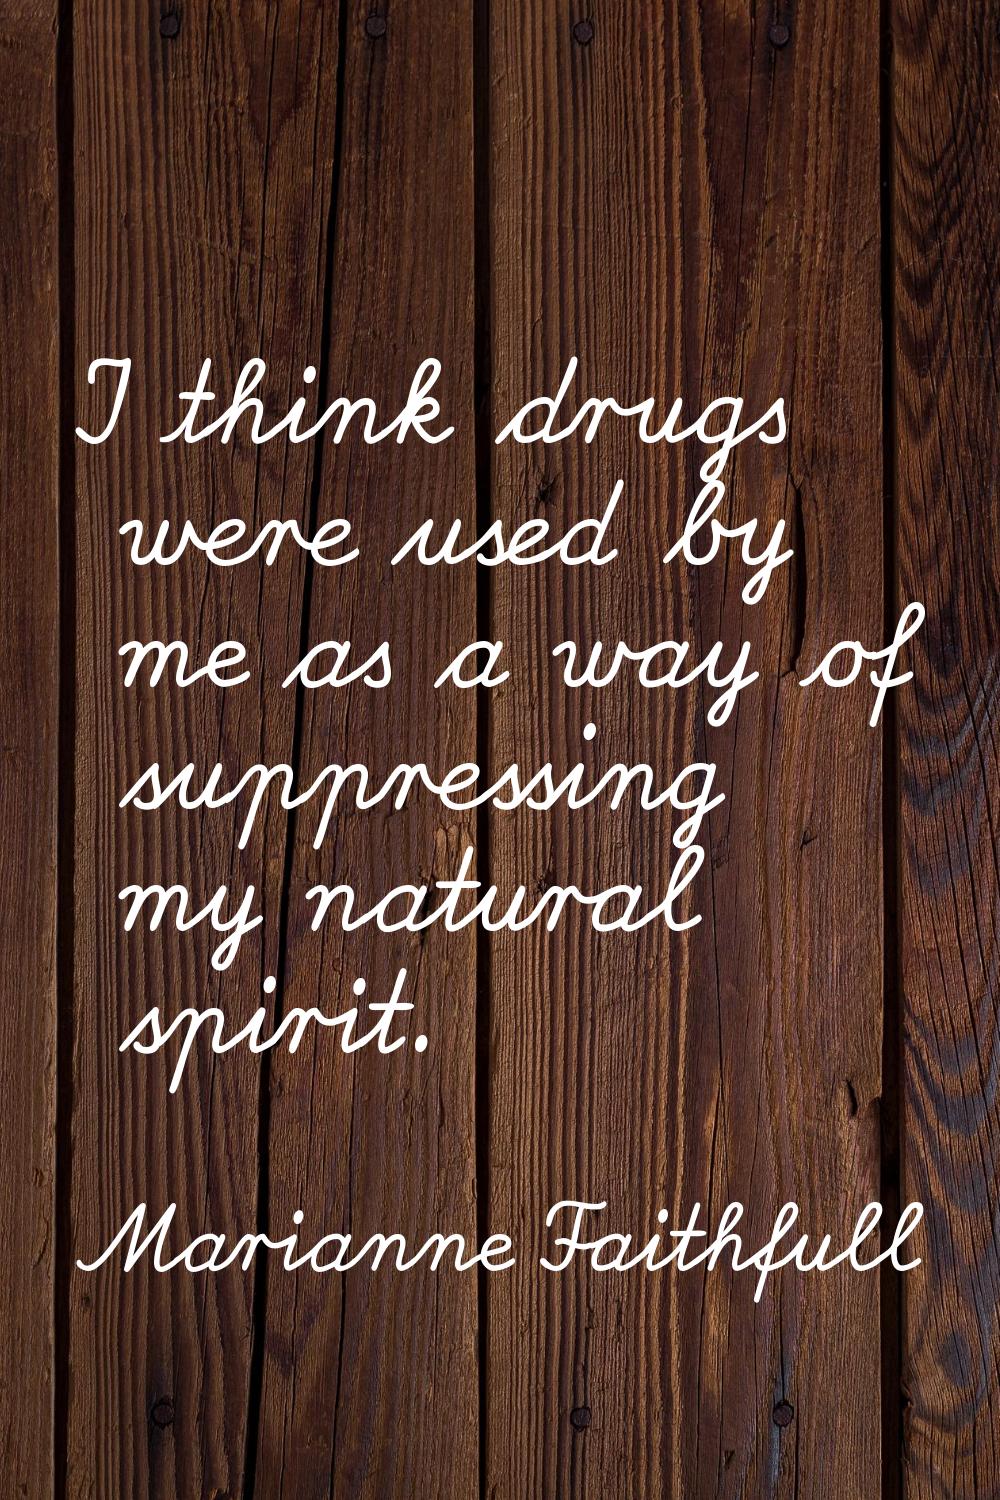 I think drugs were used by me as a way of suppressing my natural spirit.